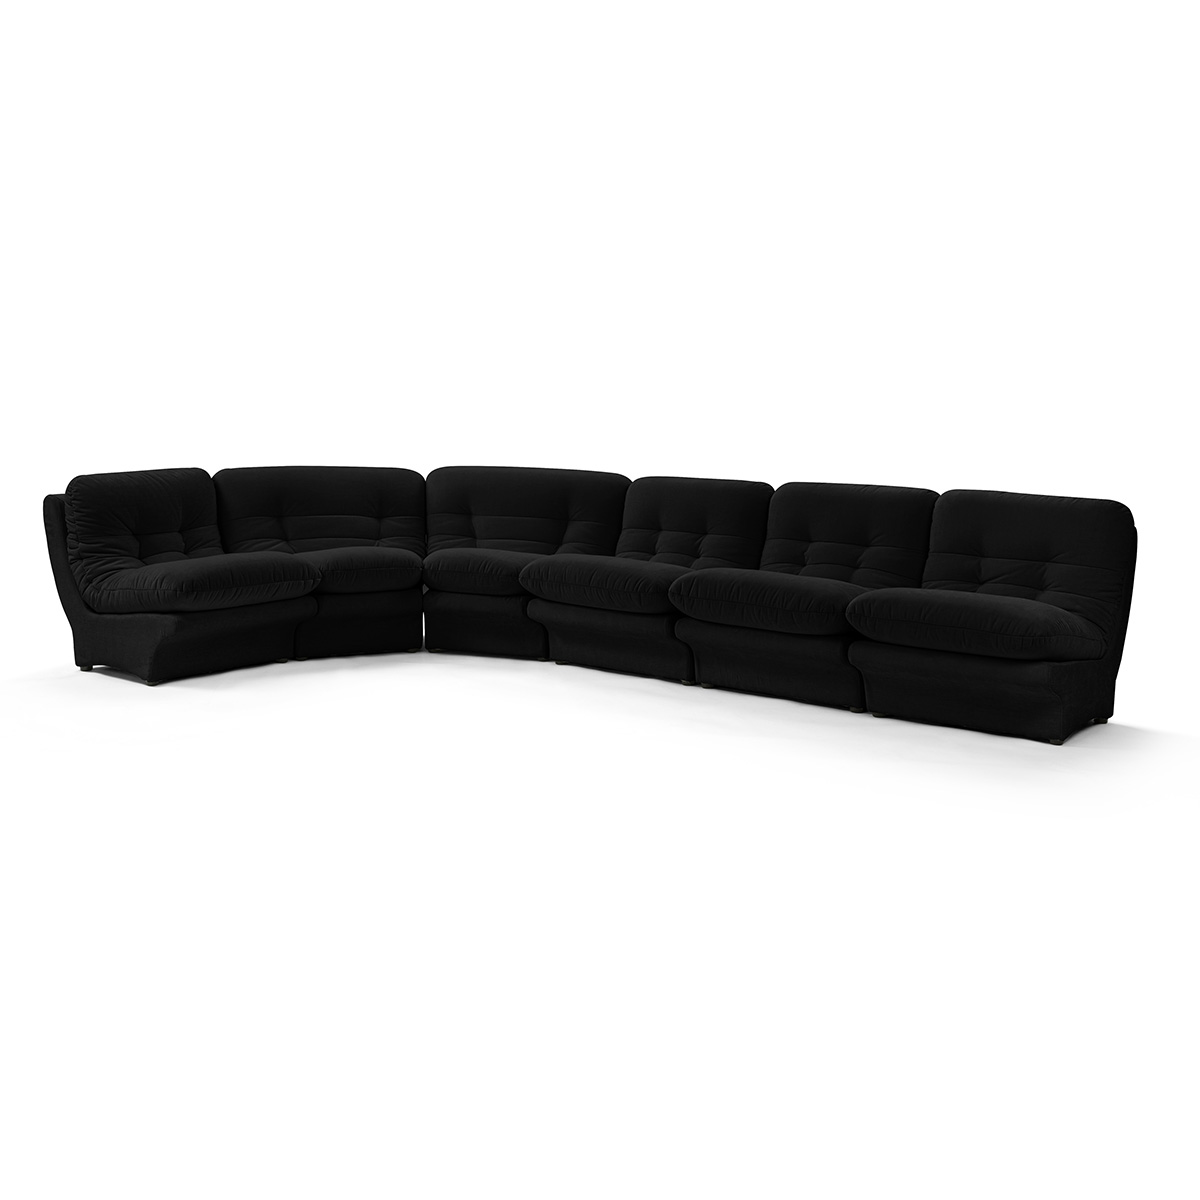 Carsons Mid Century Curved Modular Sectional Sofa / Combination 003 Chenille Helios-Jet Black